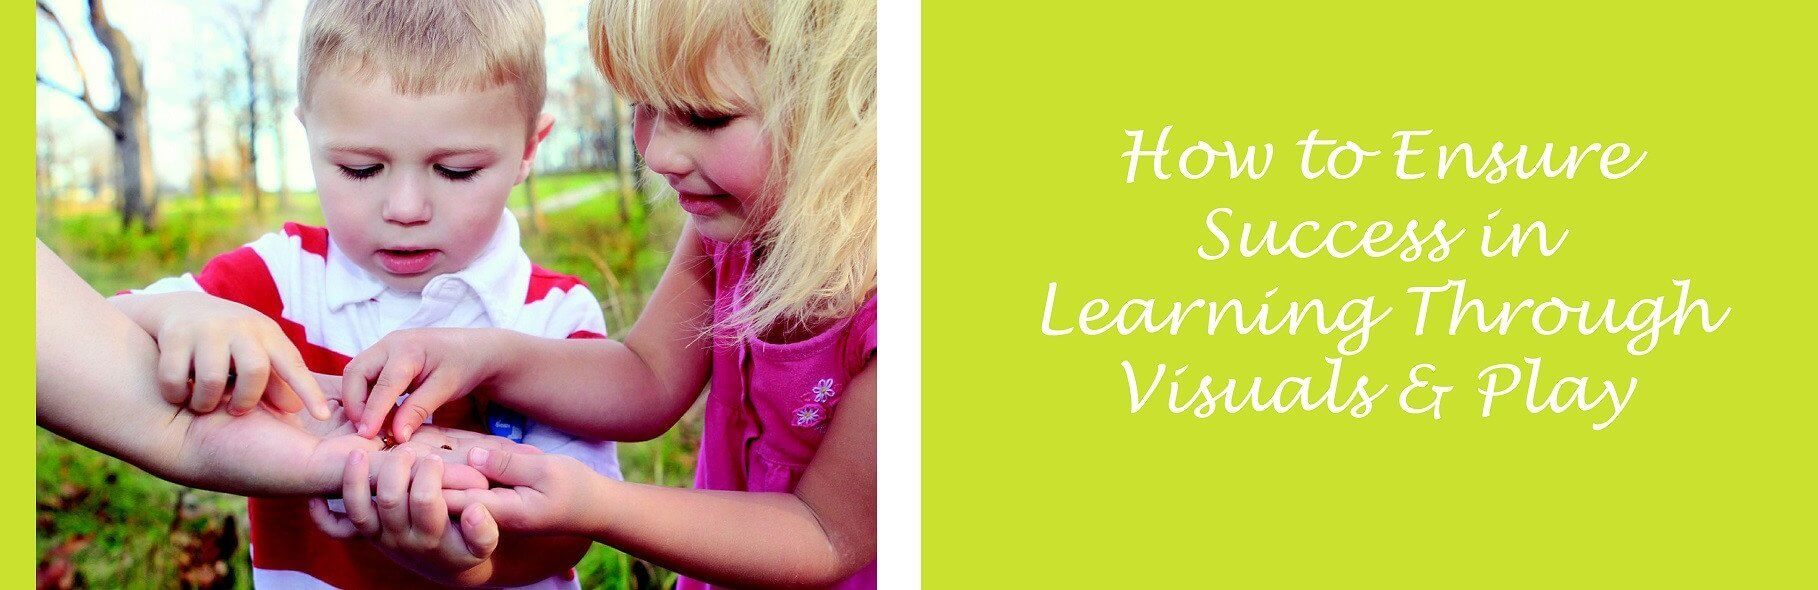 How to Ensure Success in Learning Through Visuals & Play